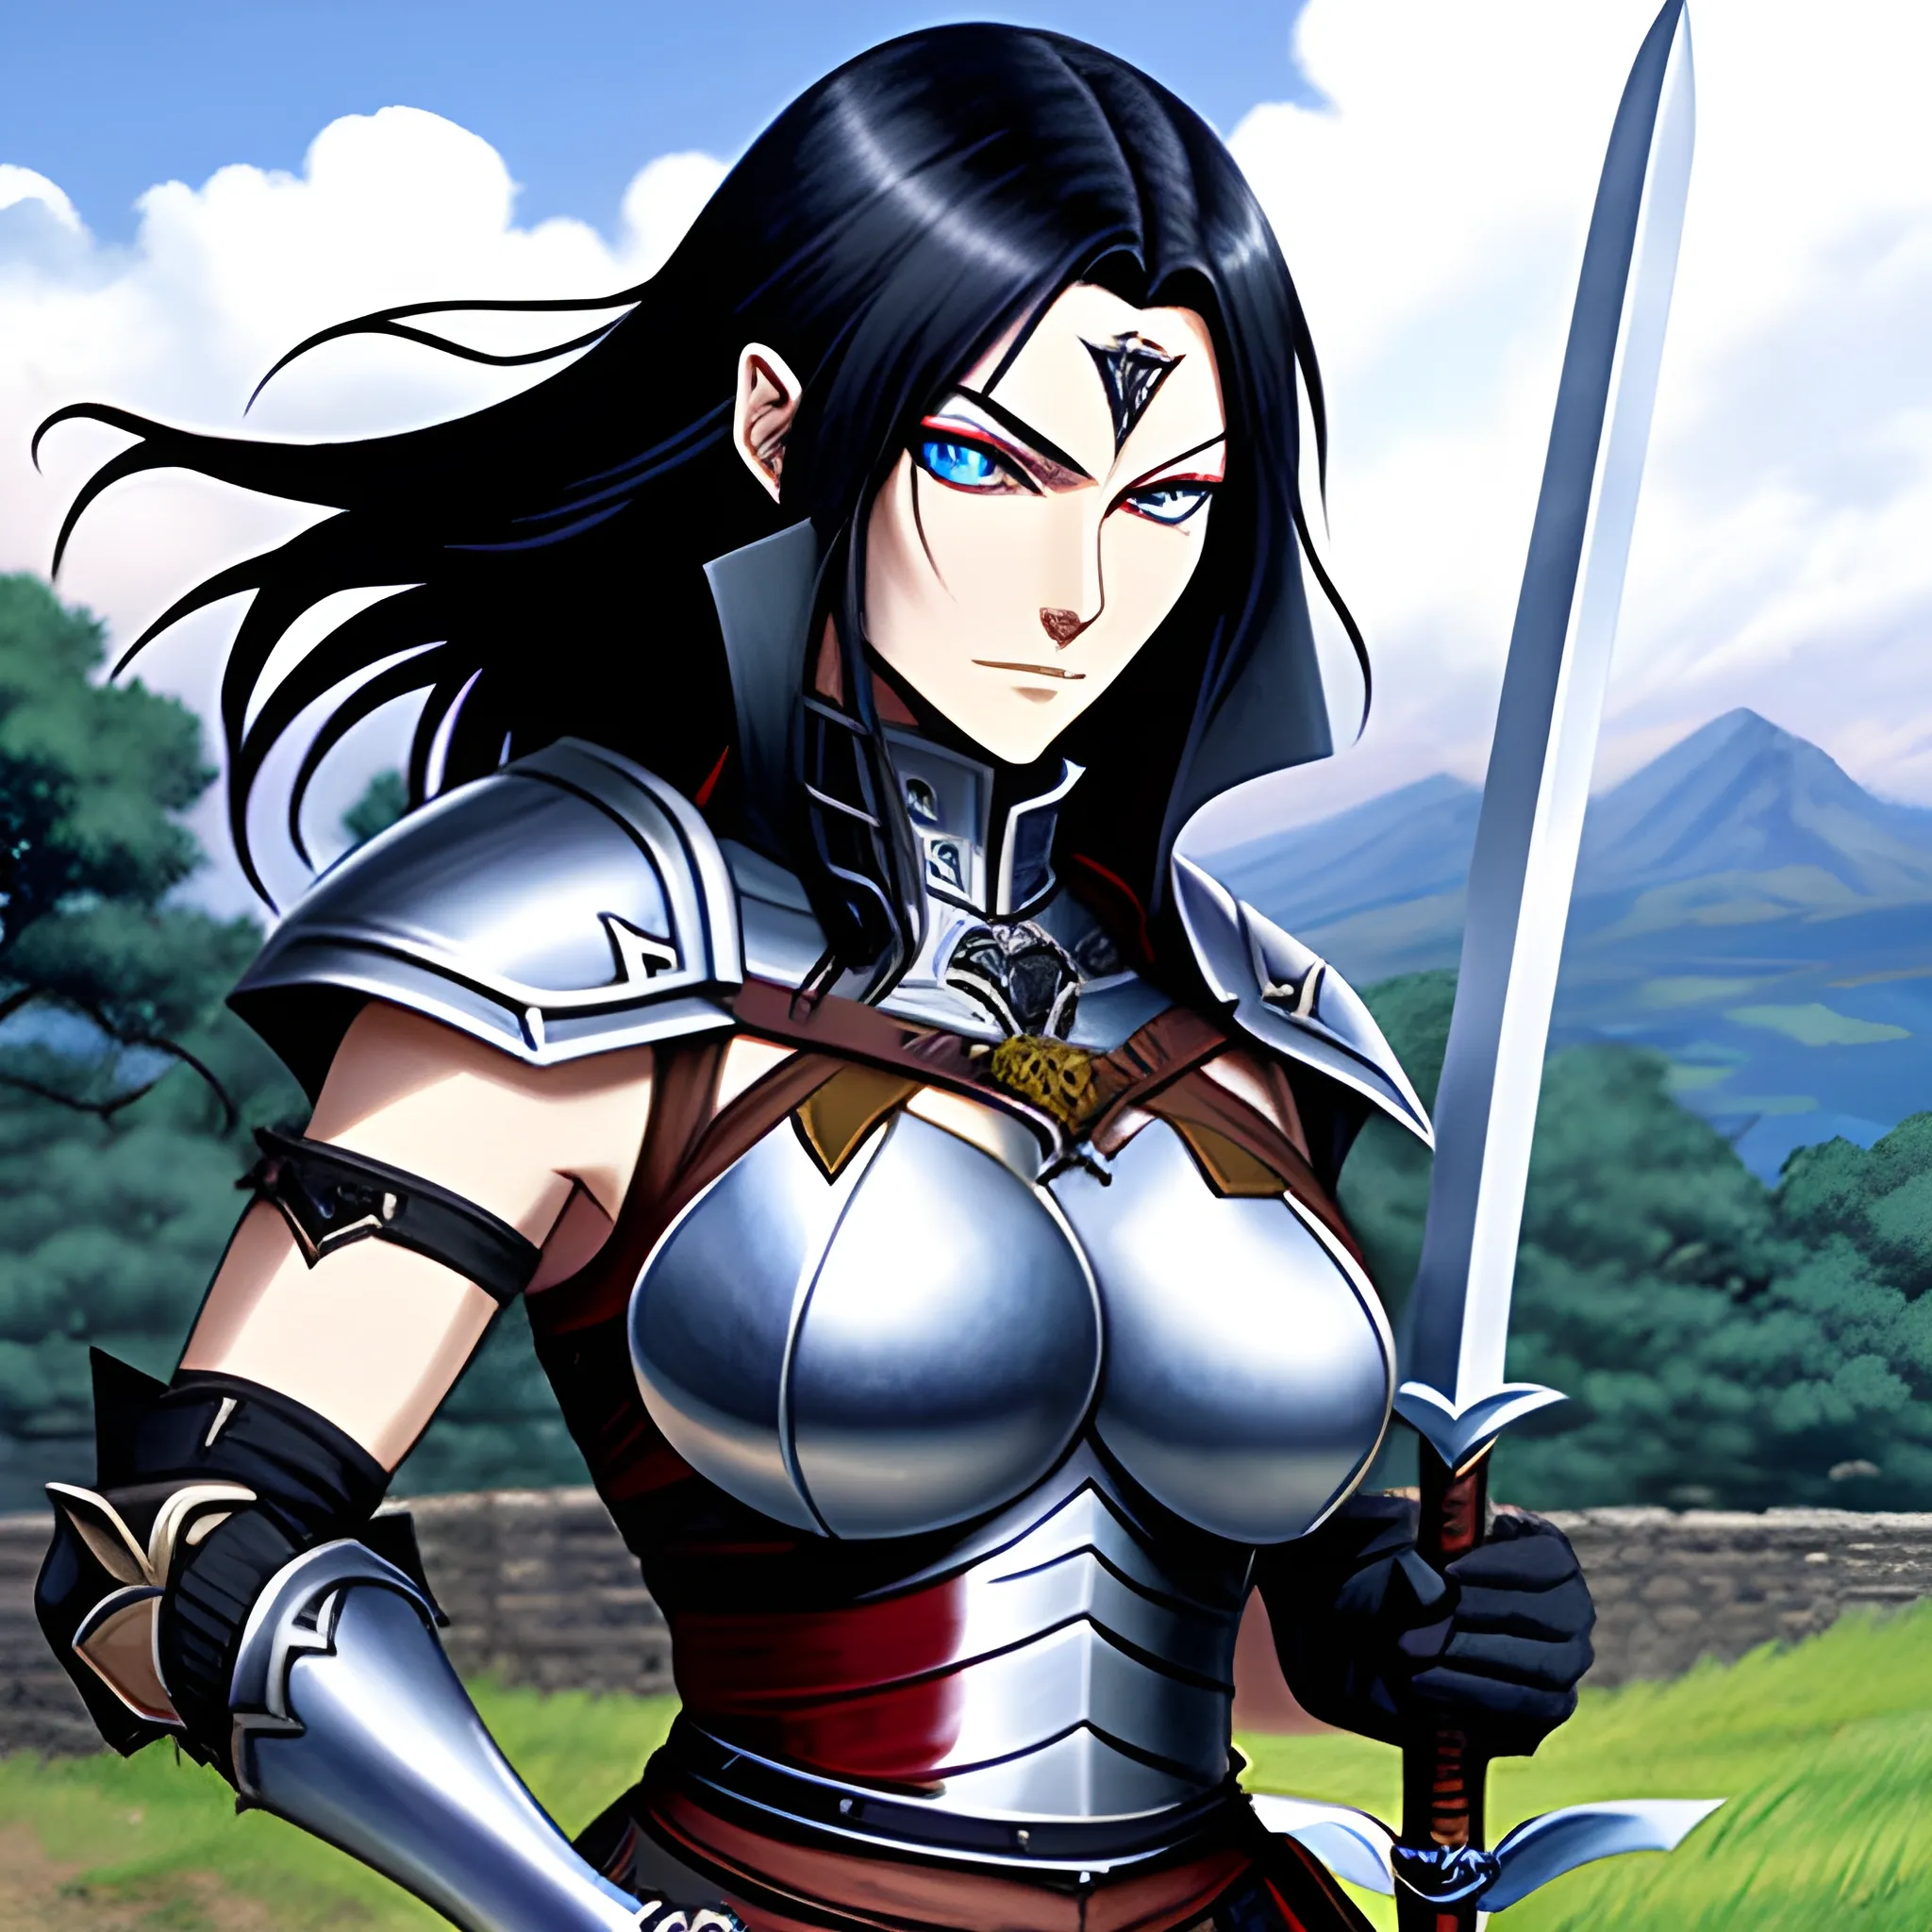 a medieval warrior anime girl with black hair, blue eyes and pale skin, wielding a giant sword